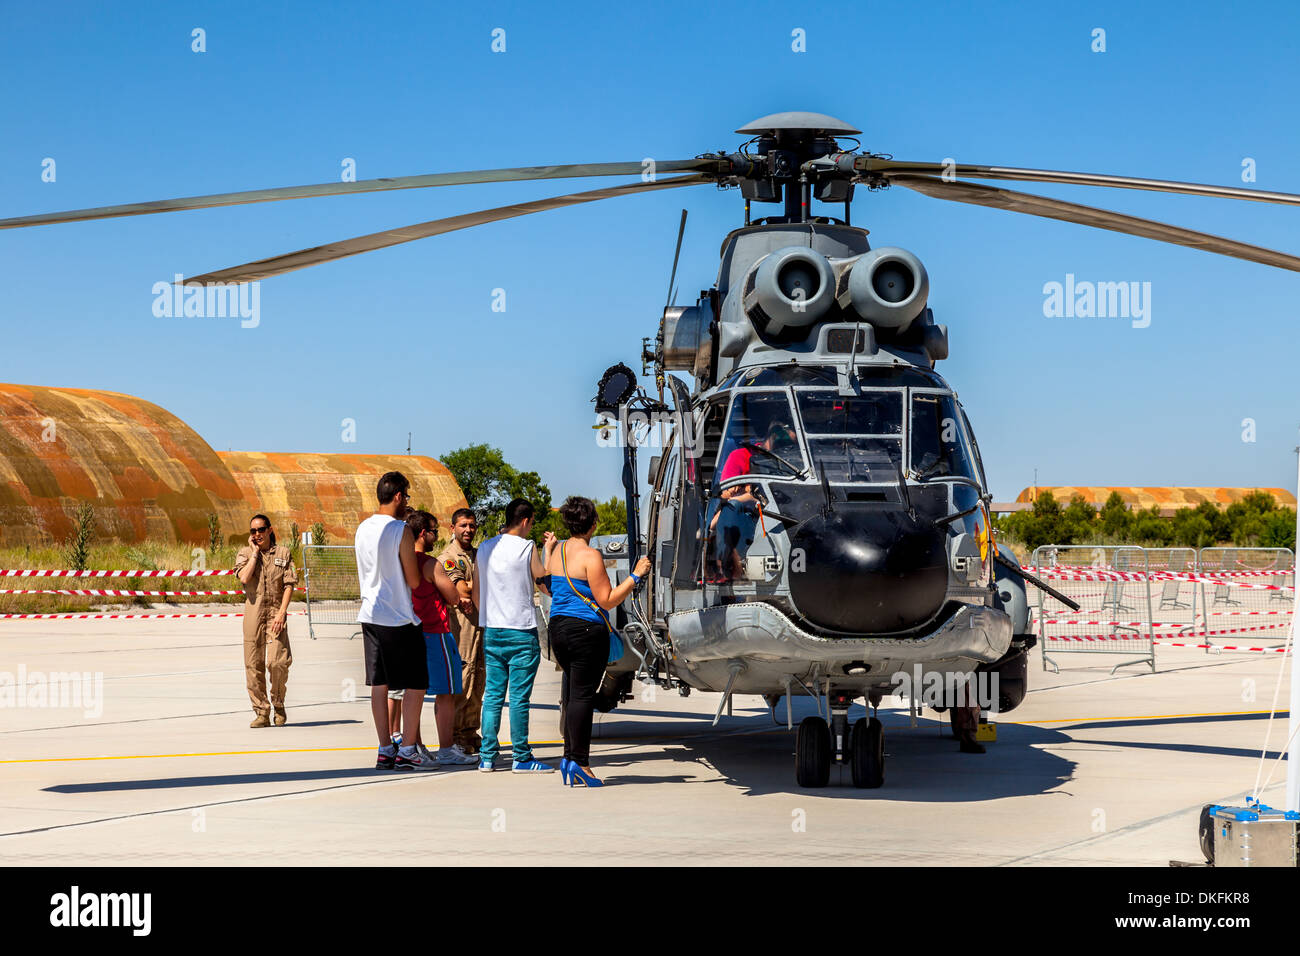 Helicopter Eurocopter AS332 Super Puma taking part in a static exhibition on the open day of the airbase of Los Llanos Stock Photo